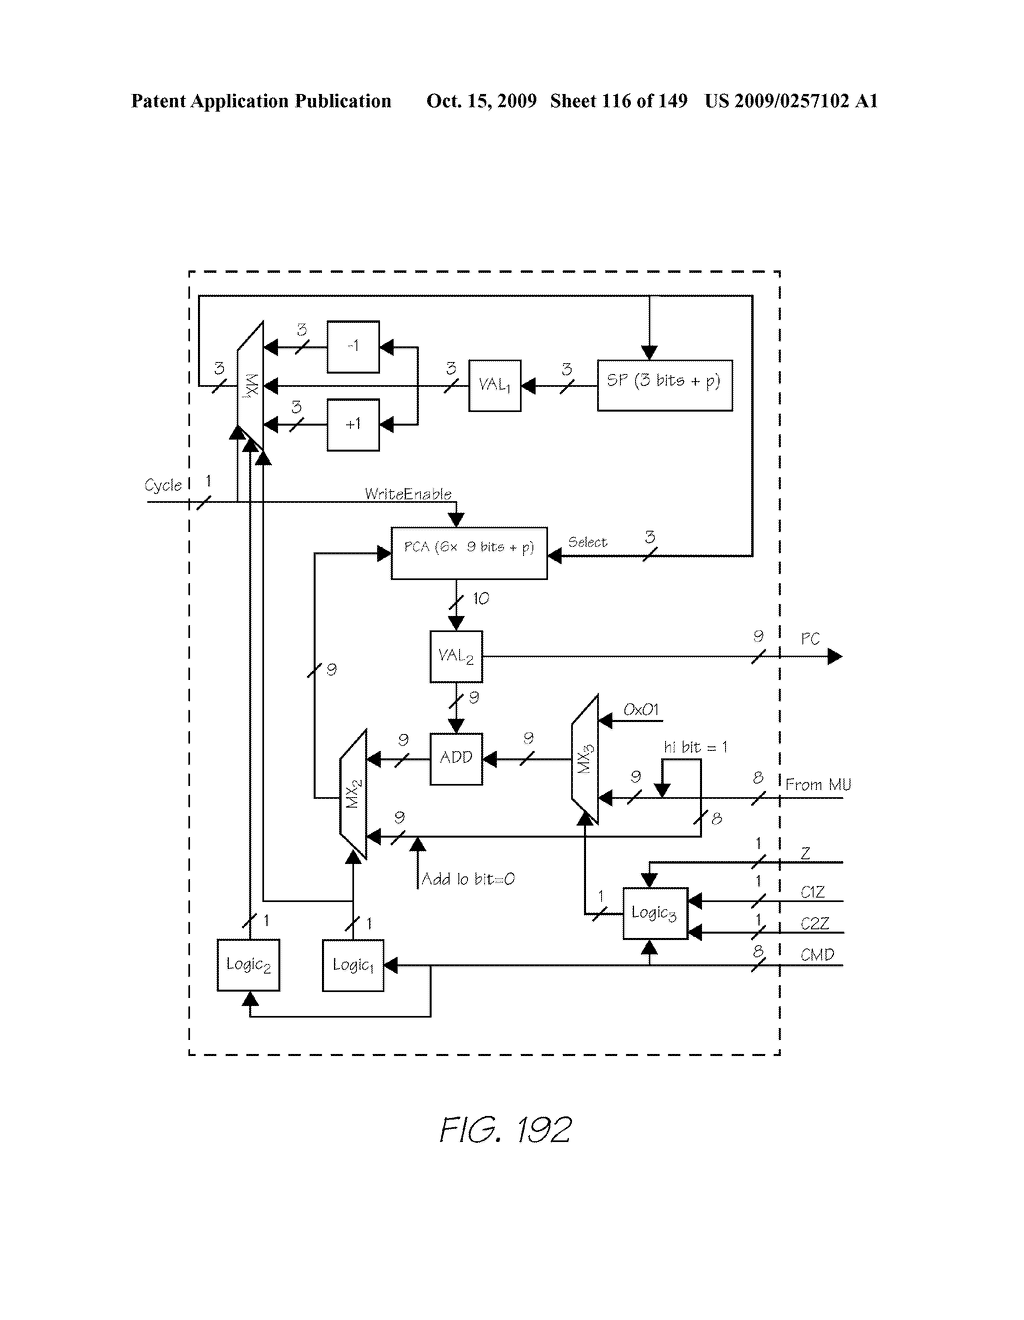 IMAGE PROCESSING APPARATUS HAVING CARD READER FOR APPLYING EFFECTS STORED ON A CARD TO A STORED IMAGE - diagram, schematic, and image 117